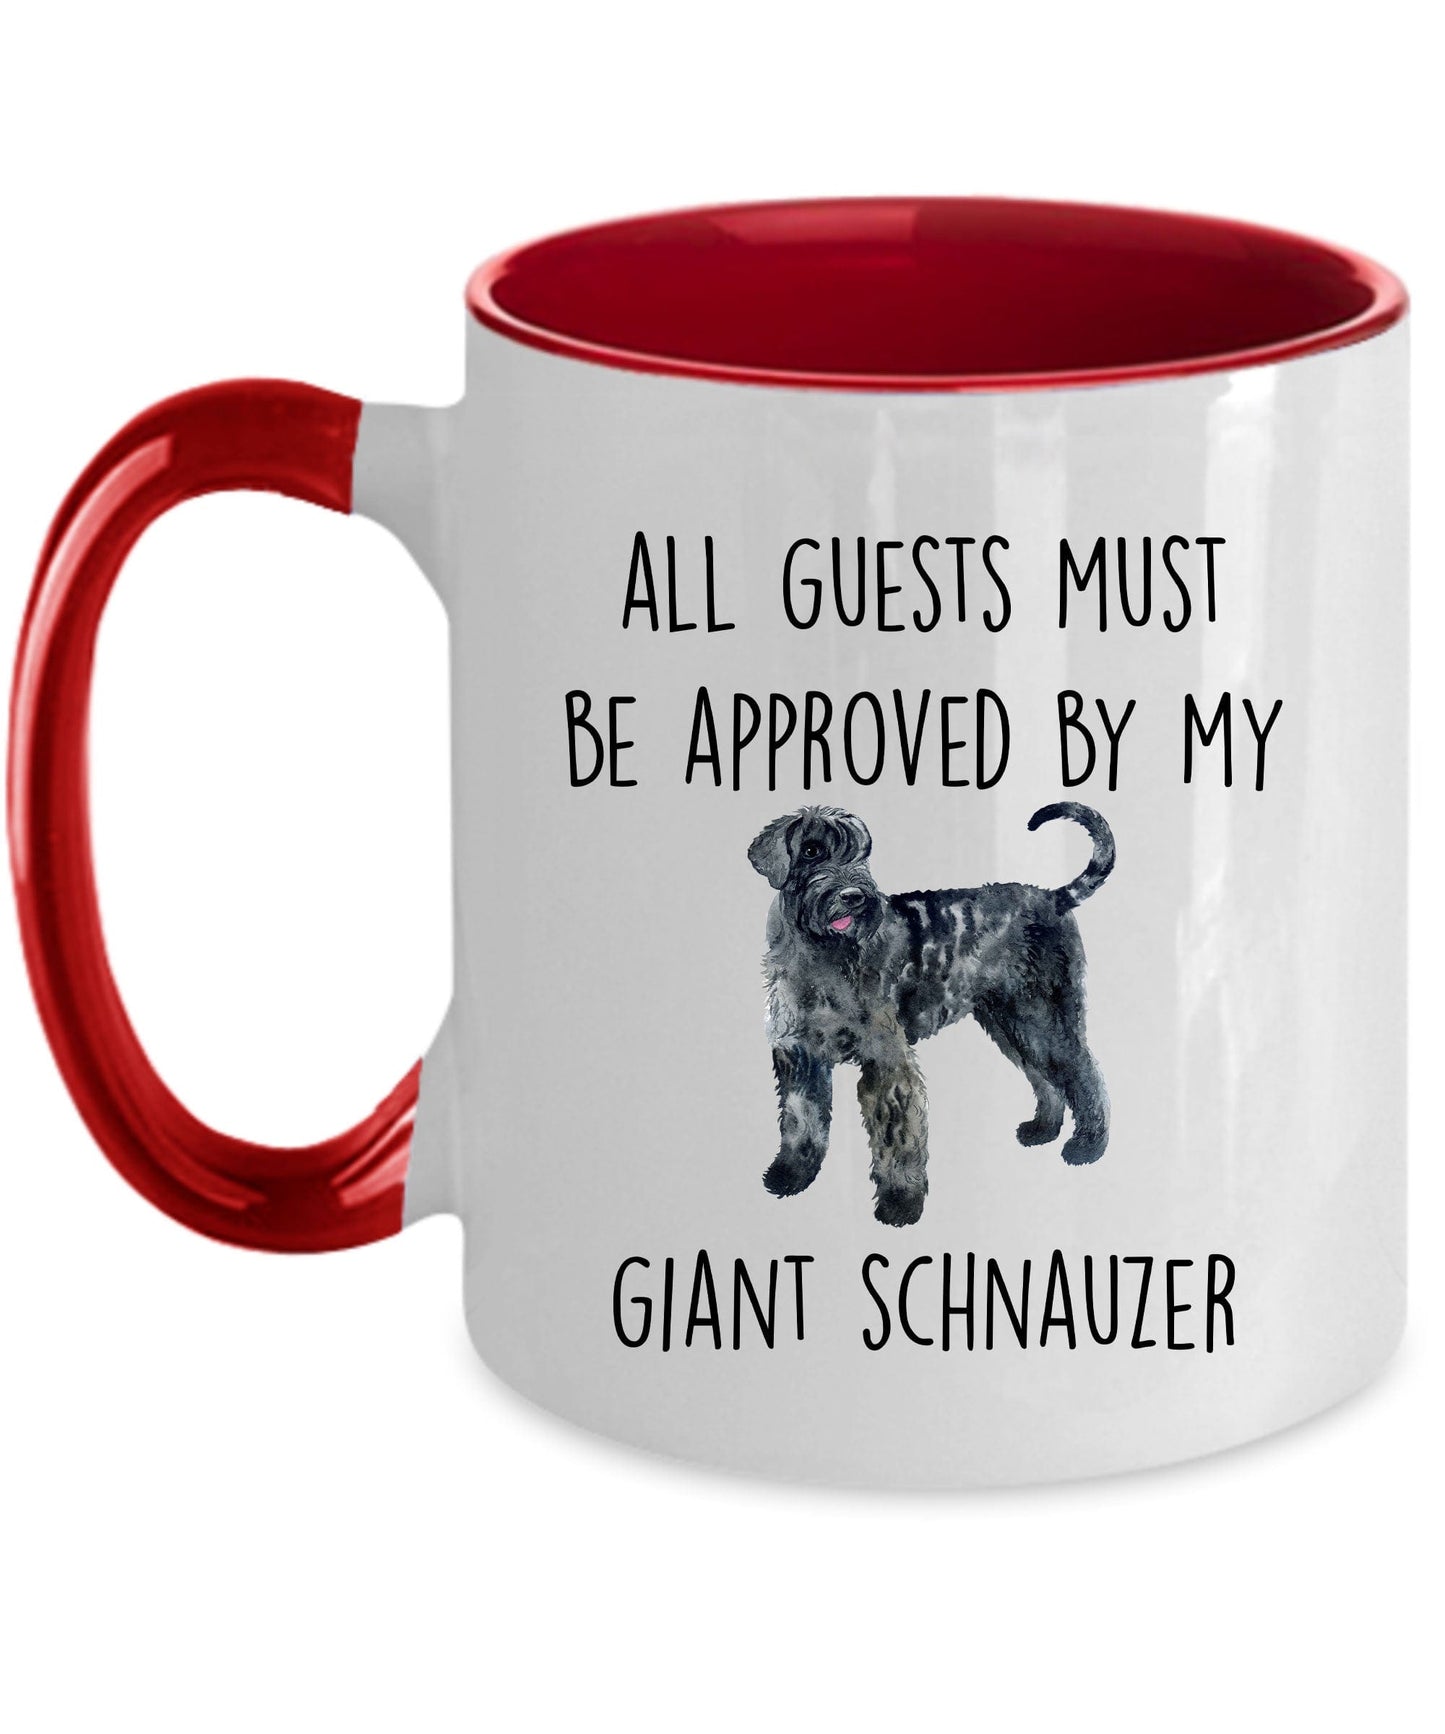 Giant Schnauzer funny dog lover coffee mug - All guests must be approved by my Giant Schnauzer